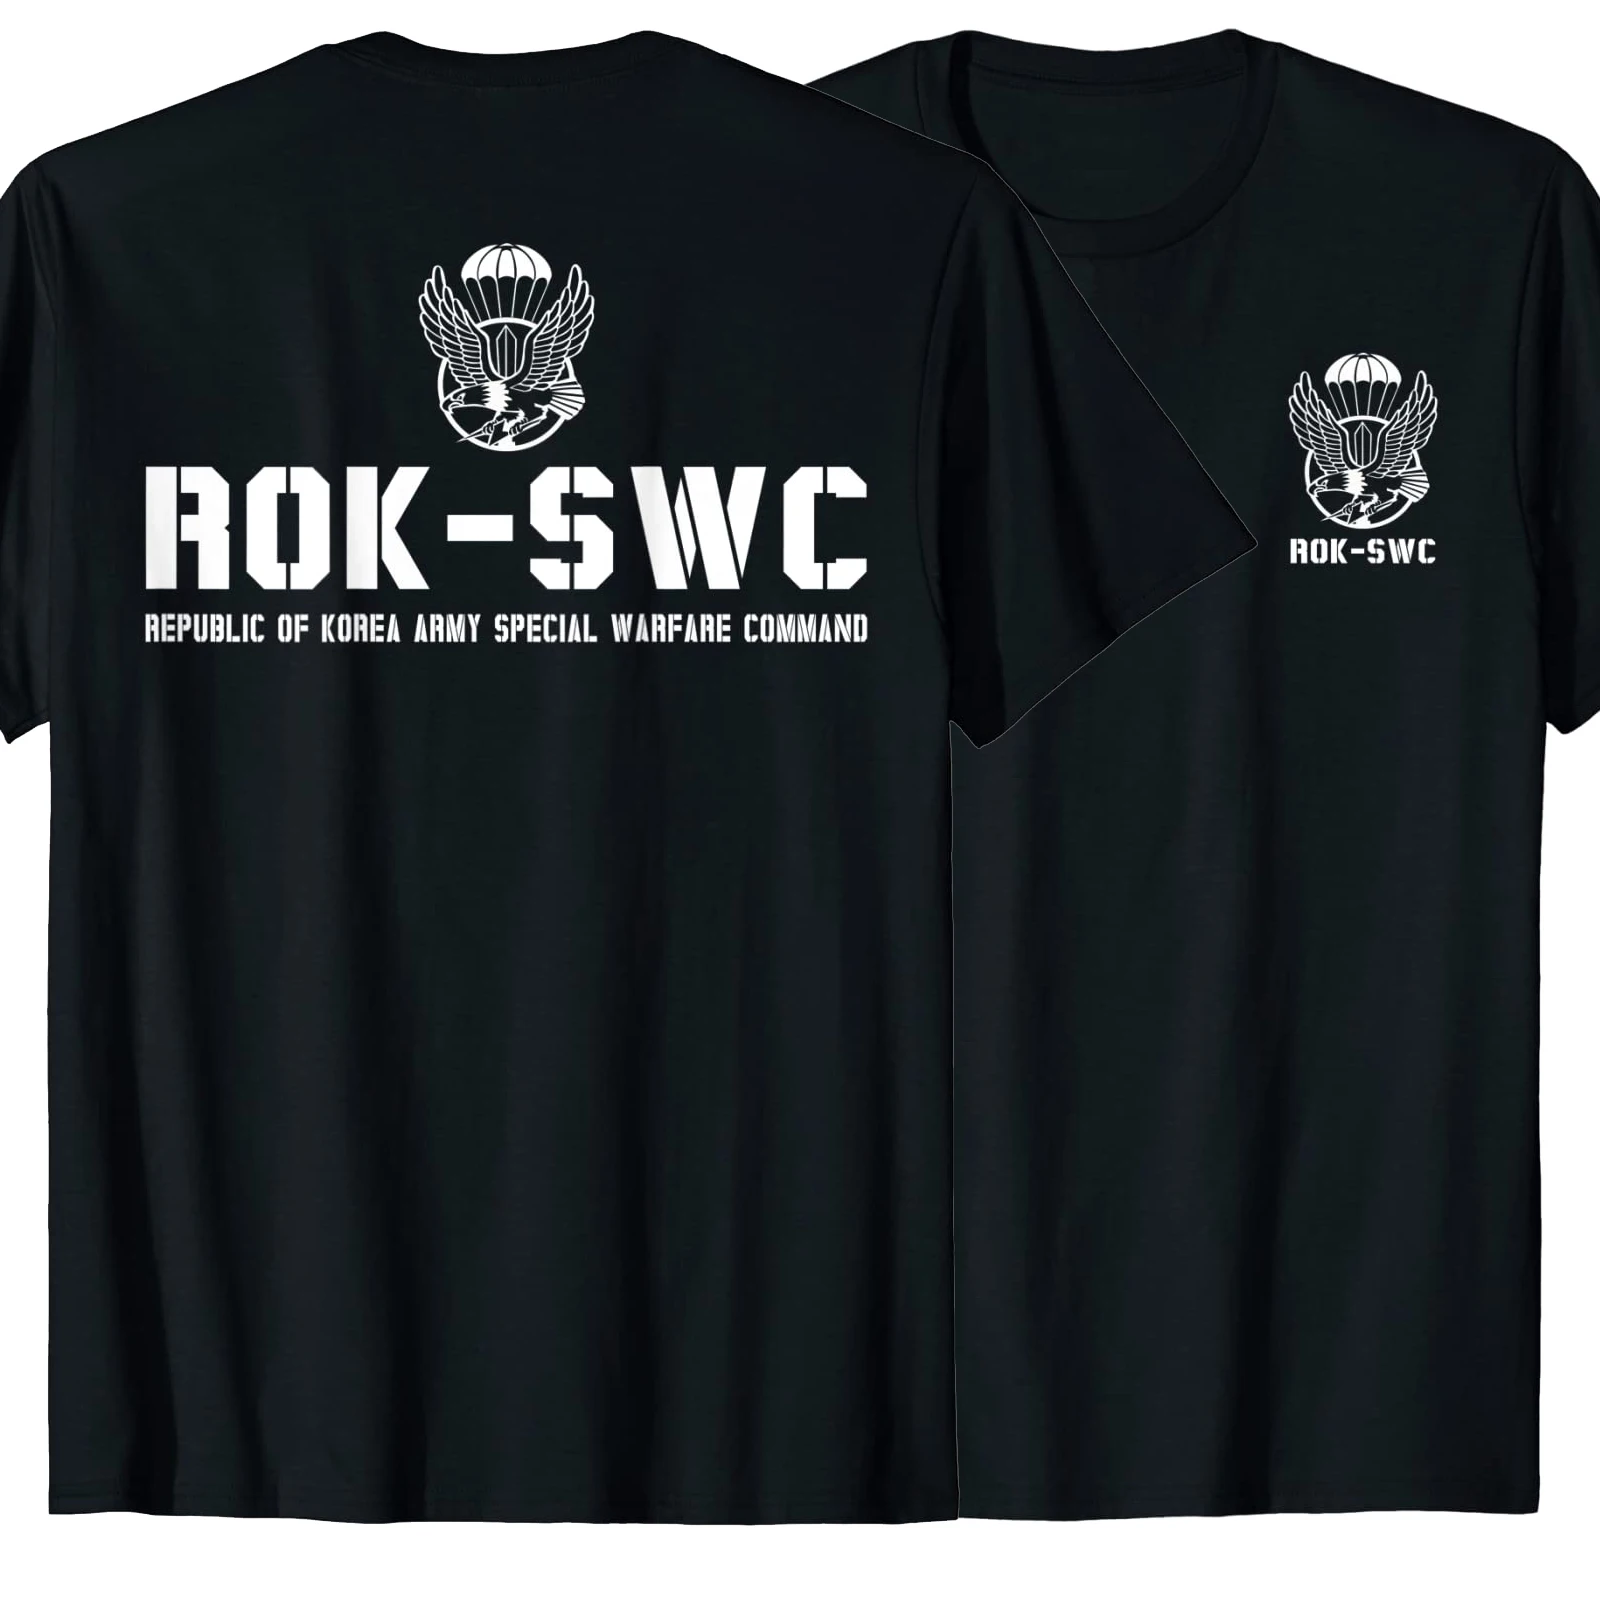 

Republic of Korea ROK Army Special Forces Black Berets T Shirt. Short Sleeve 100% Cotton Casual T-shirts Loose Top Size S-3XL